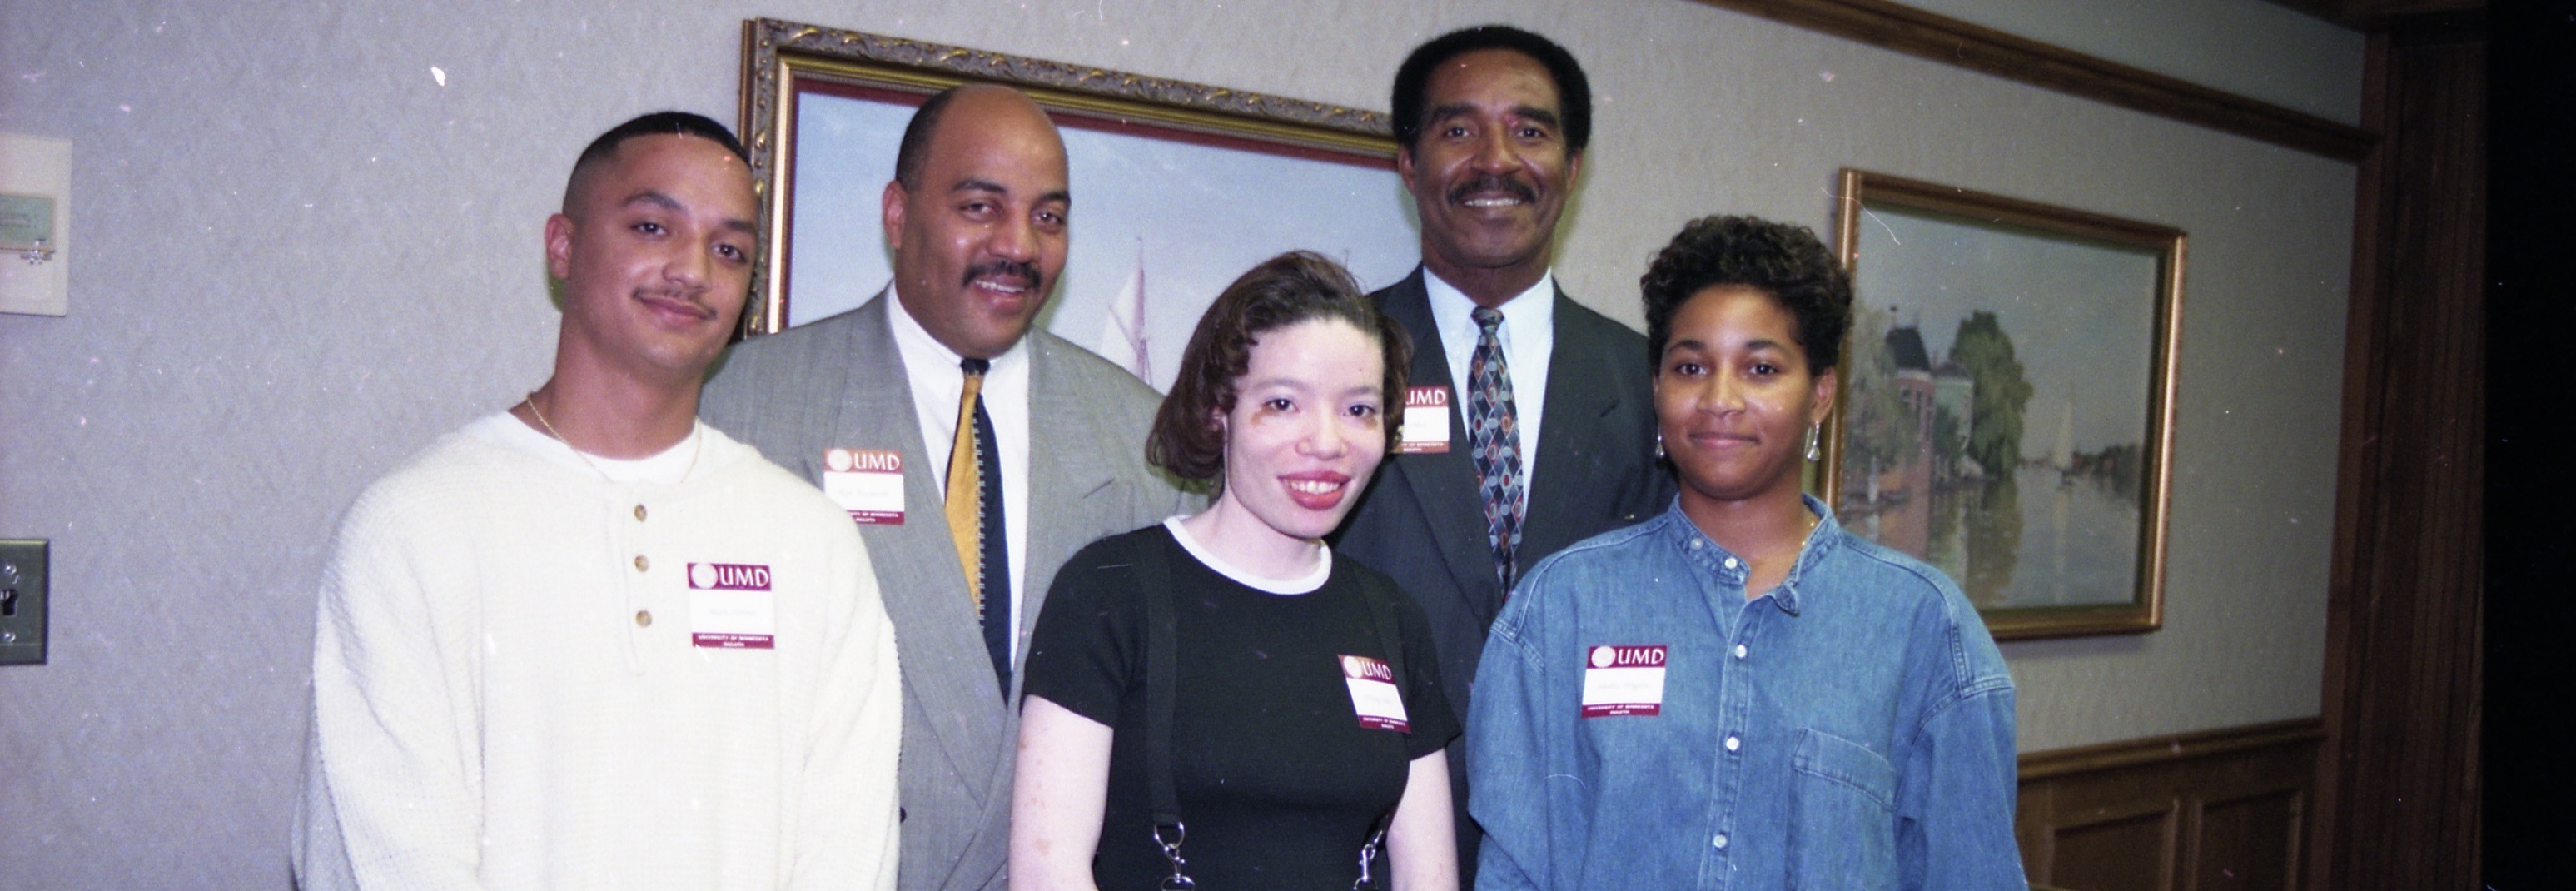 Two student scholarship recipients, Jason Holmes and Tiffany Day, with Saadia Wiggins, Ken Foxworth and Harry Oden.